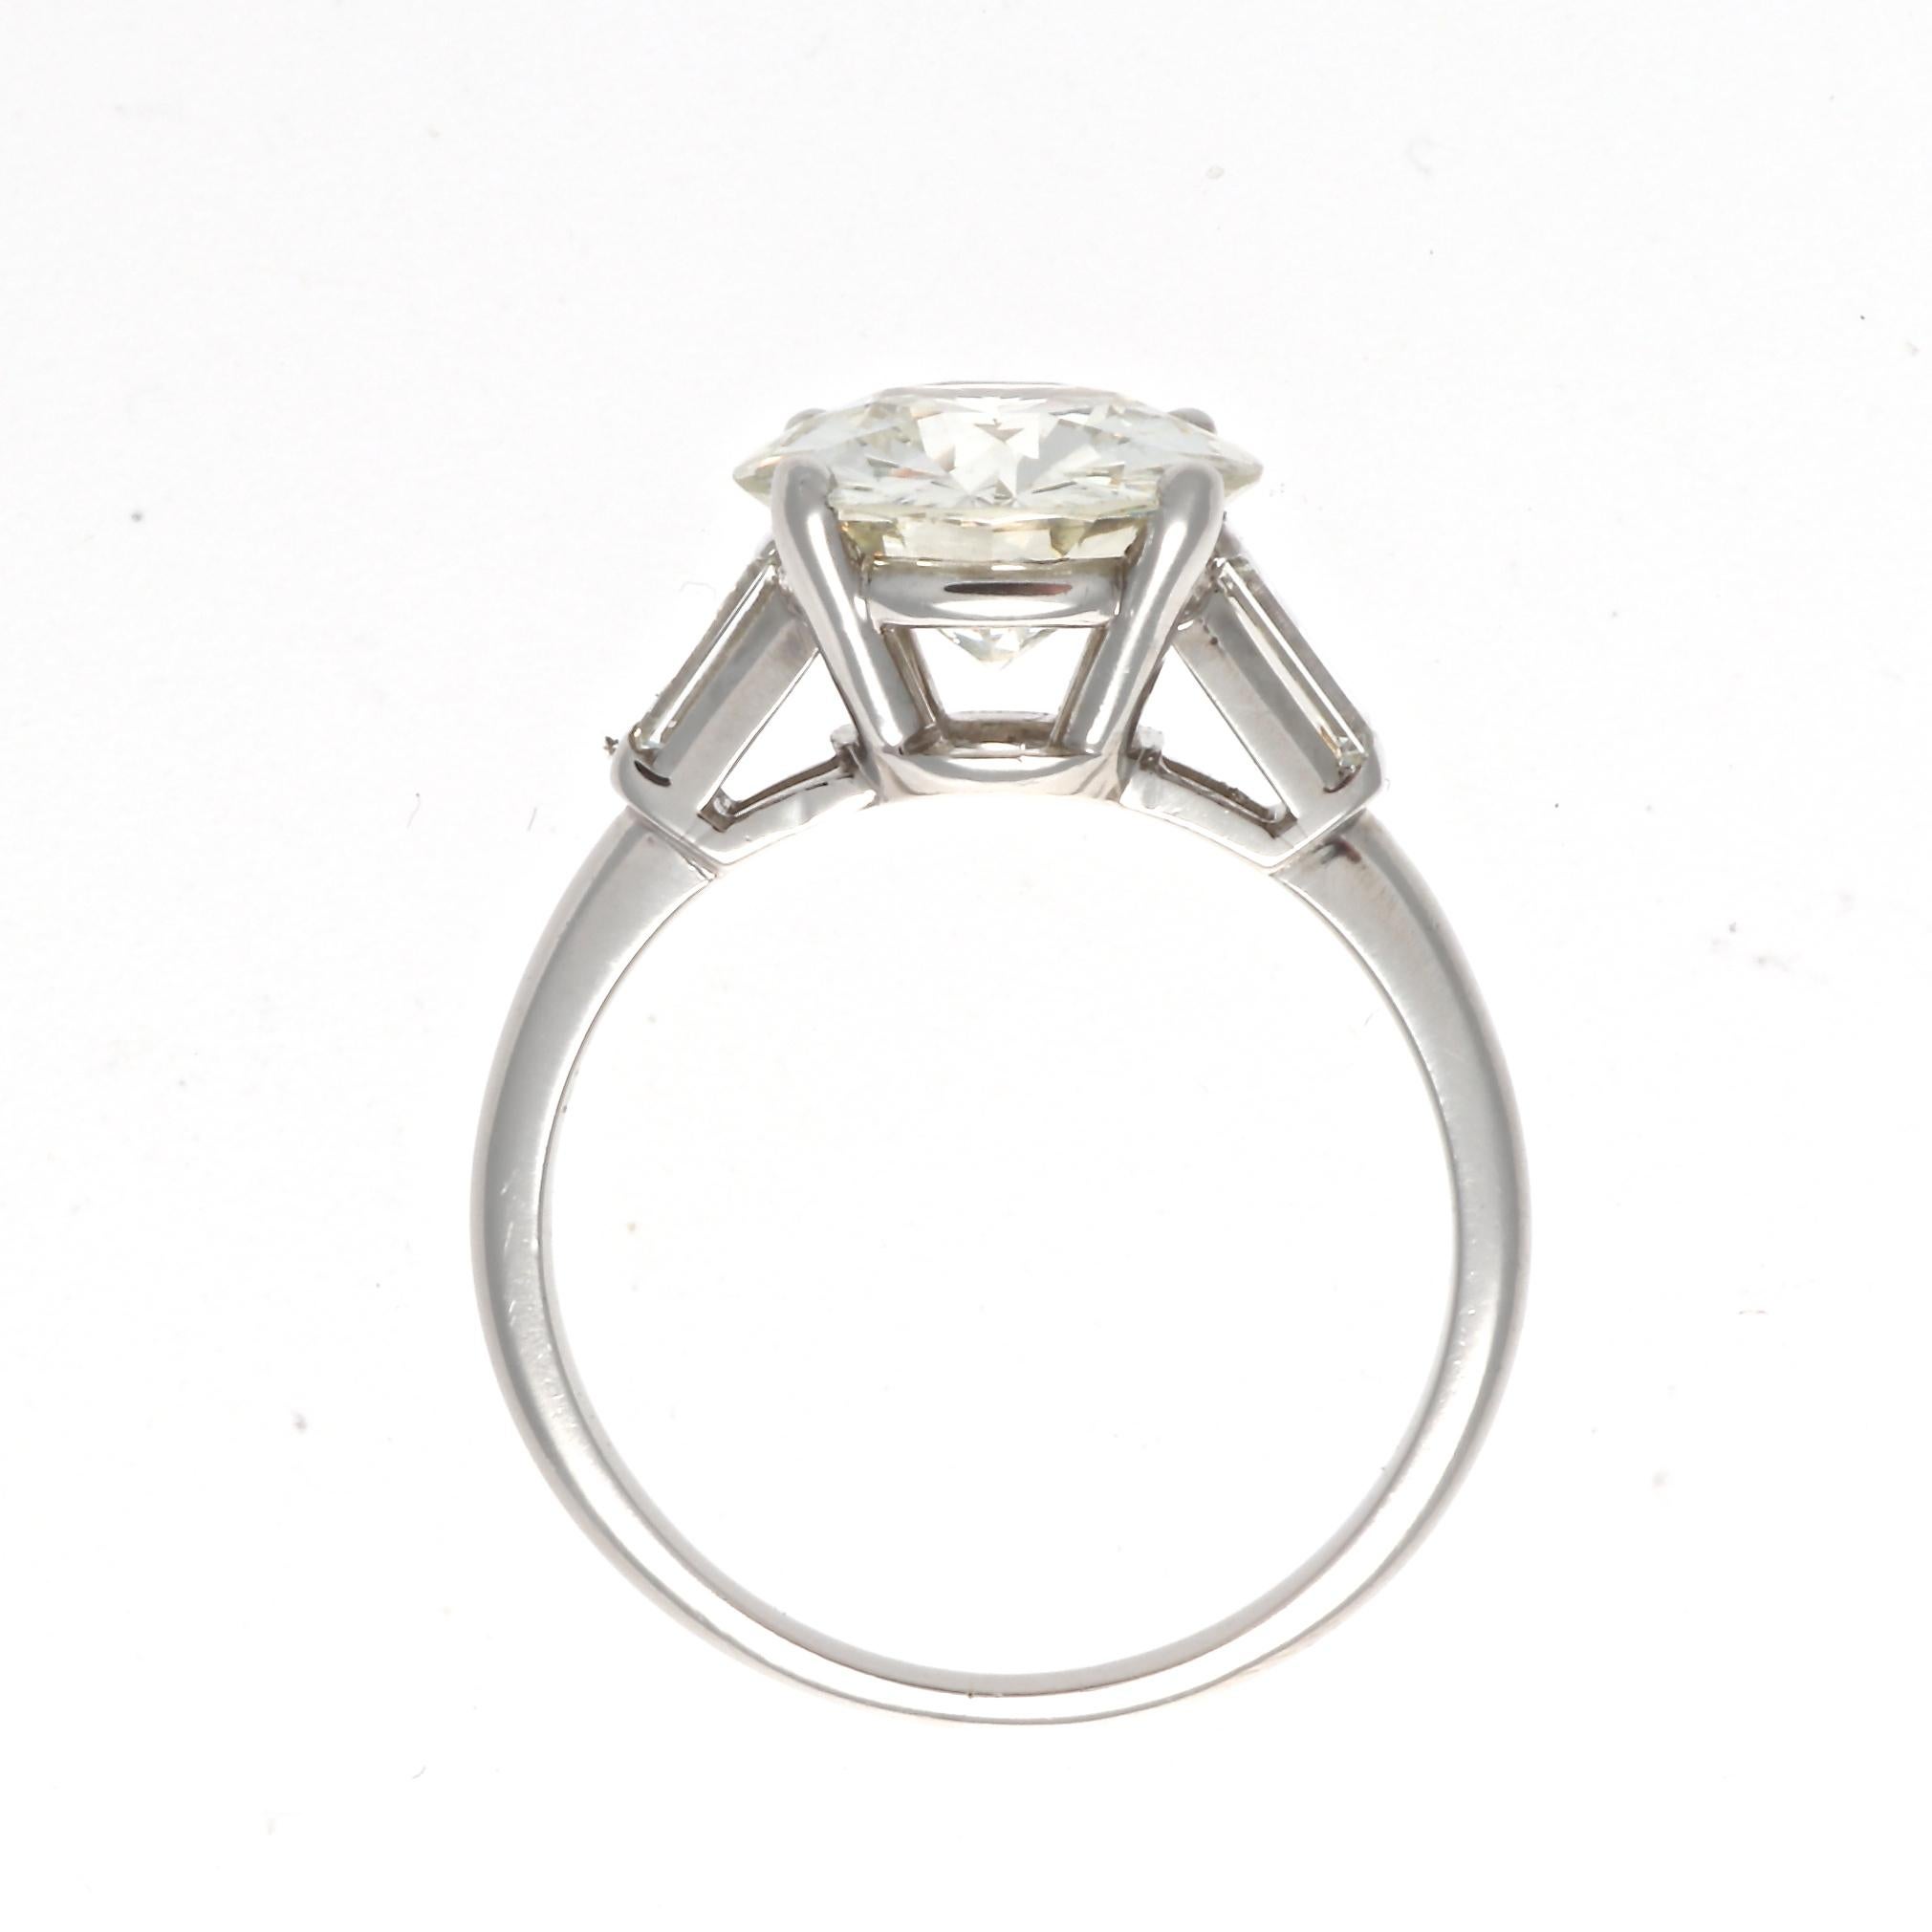 A sentiment of tradition but most importantly love that has been passed on from generation to generation. Featuring a 3.44 carat round brilliant cut diamond that is GIA certified as L color, VS2 clarity. Elegantly accented on either side by a single